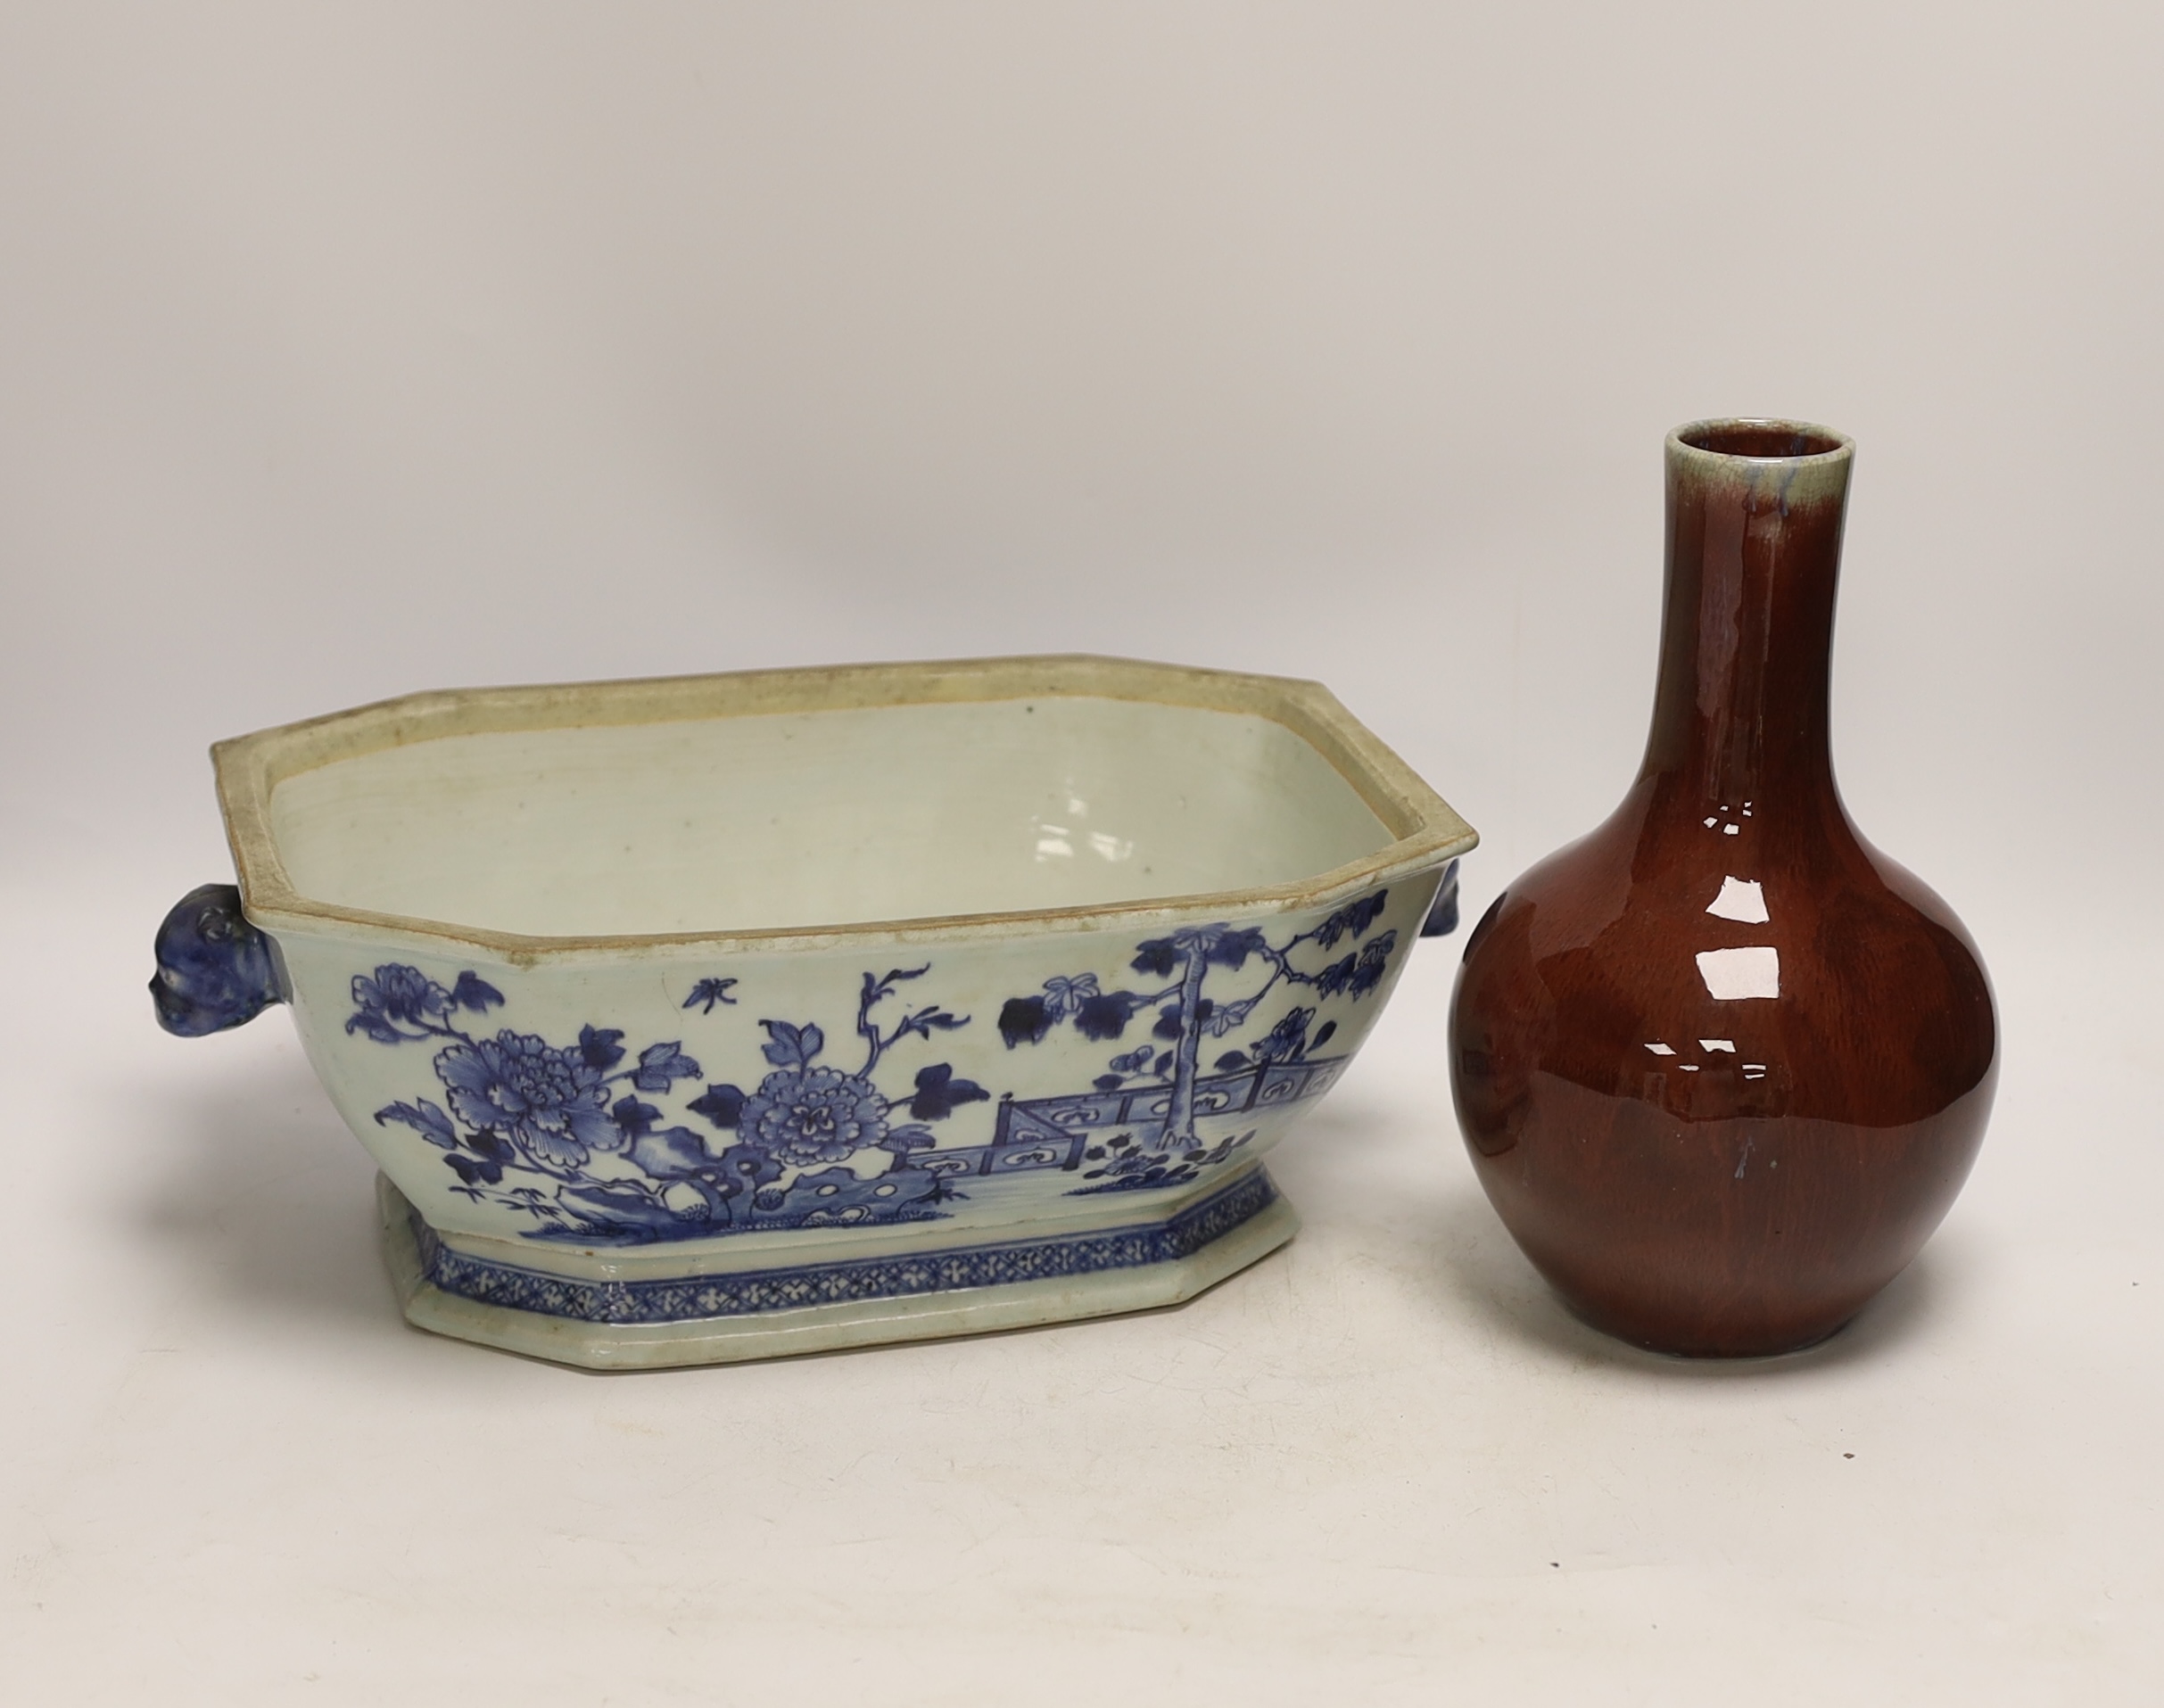 An 18th century Chinese blue and white tureen together with a sang de boeuf vase